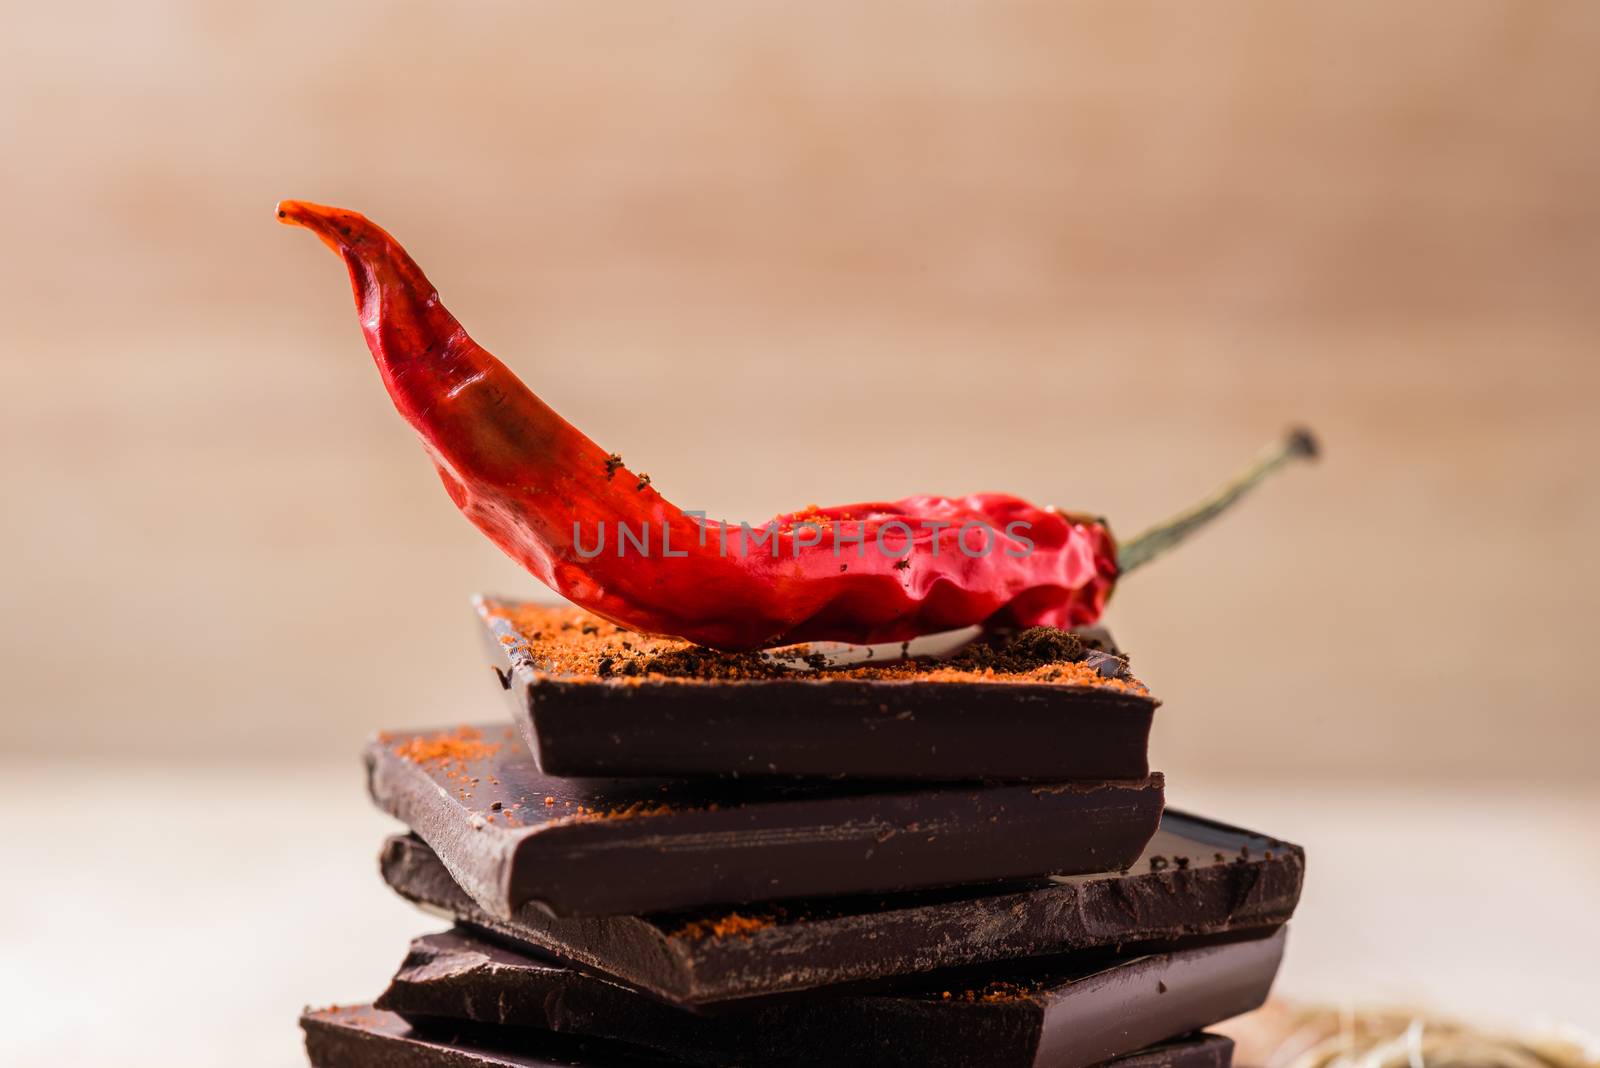 Dry red chili peppers on chocolate bars with cayenne powder.